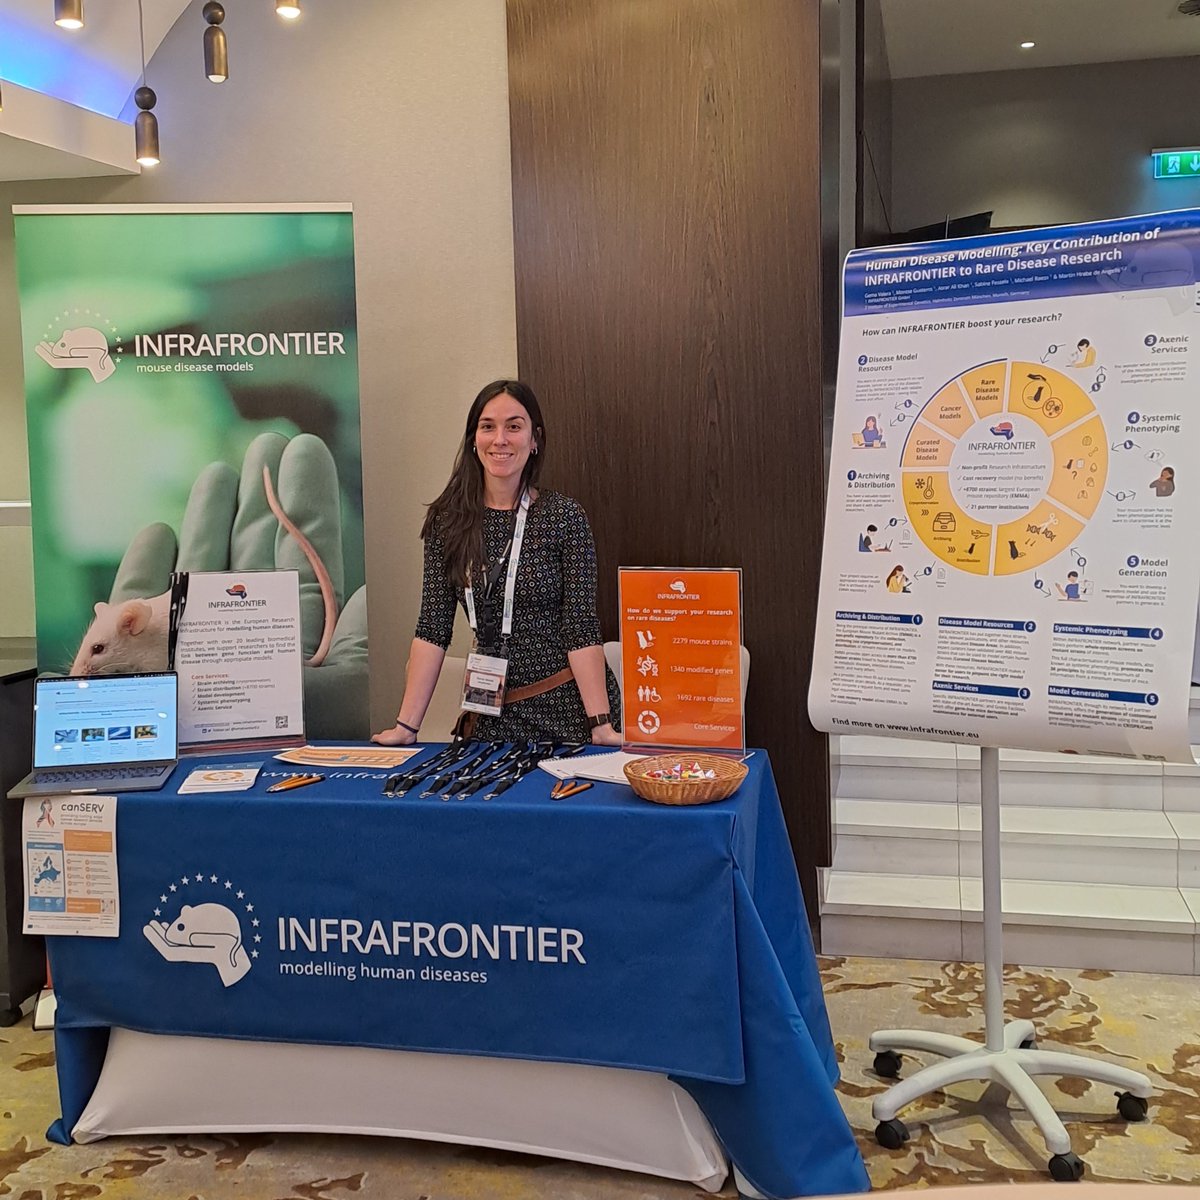 🏁We are reaching the halfway point of the second (and last🥺) day of #RARE2023, but here at booth and poster 33, INFRAFRONTIER 🤲🏻🐭 will continue to be at your service until the end. Stop by to learn how we can assist you in your research on #RareDiseases.
#EU_Ris #DiseaseModels